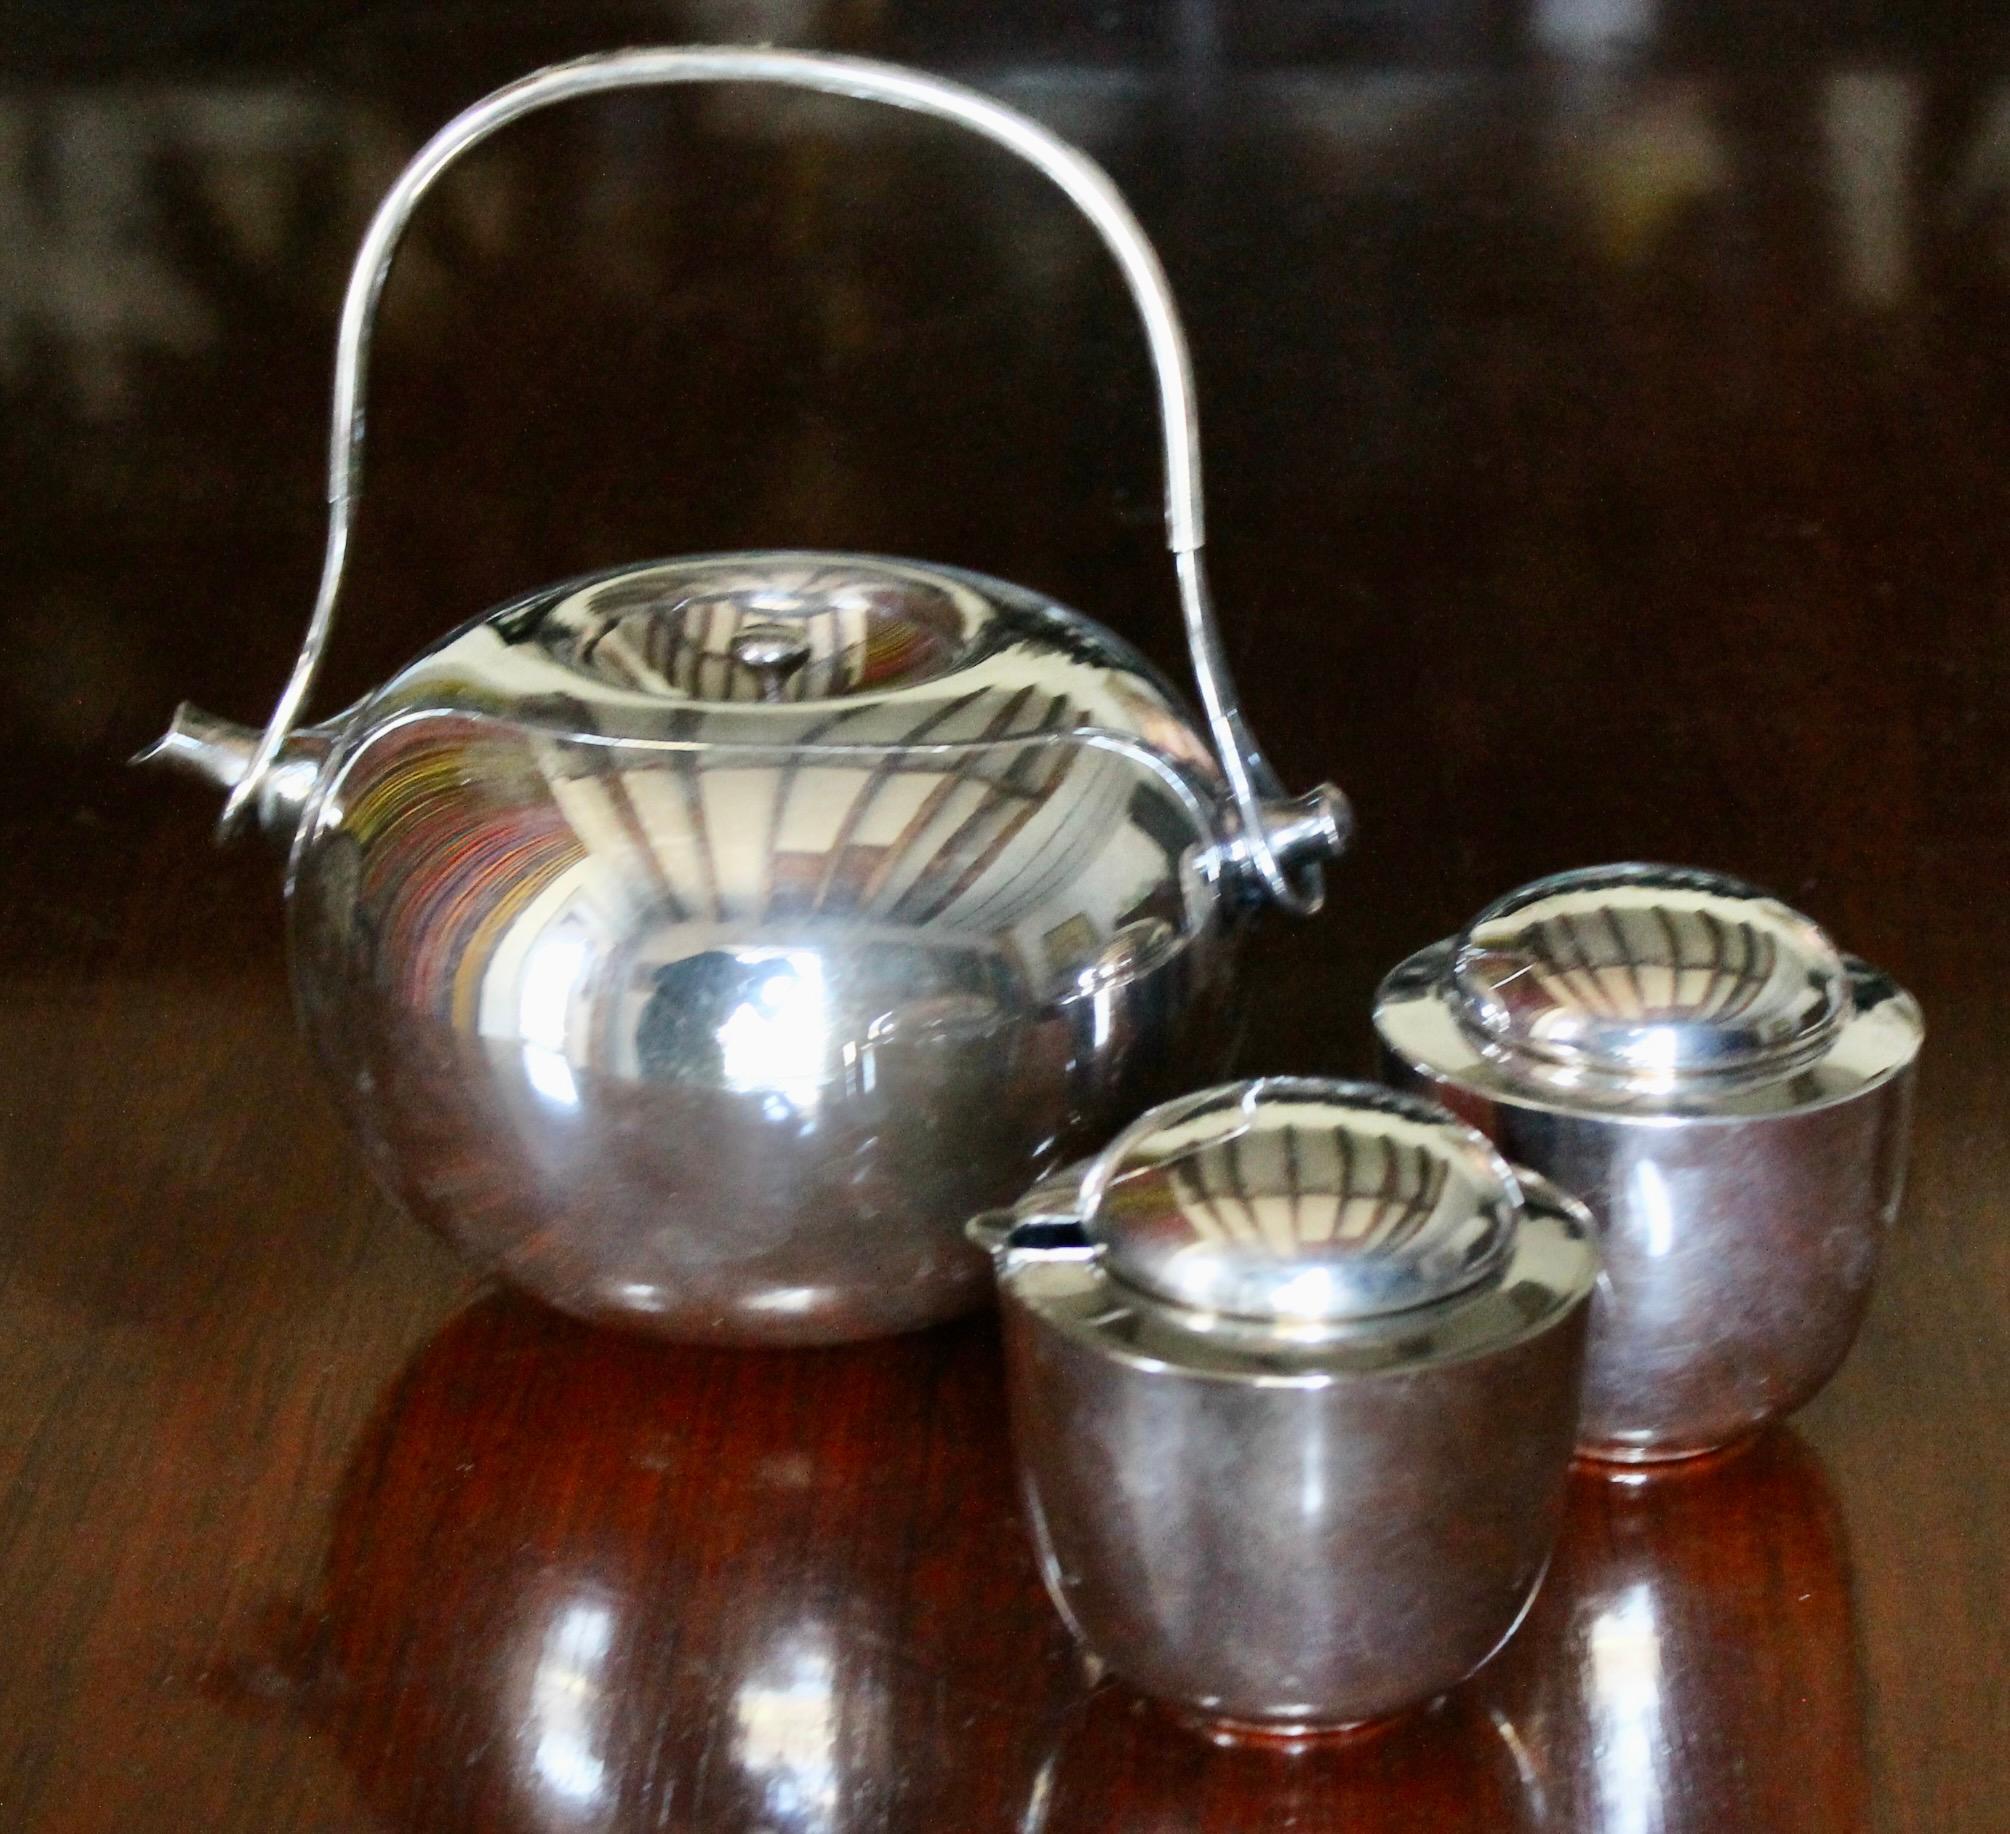 Silver Plated Brass Tea Pot (with strainer) and Sugar/ Creamer. Designed by Vivianne Torun Bulow-Hube for Dansk International.  And produced from 1960-69. Perhaps the rarest and most sort after of all the great Dansk productions.